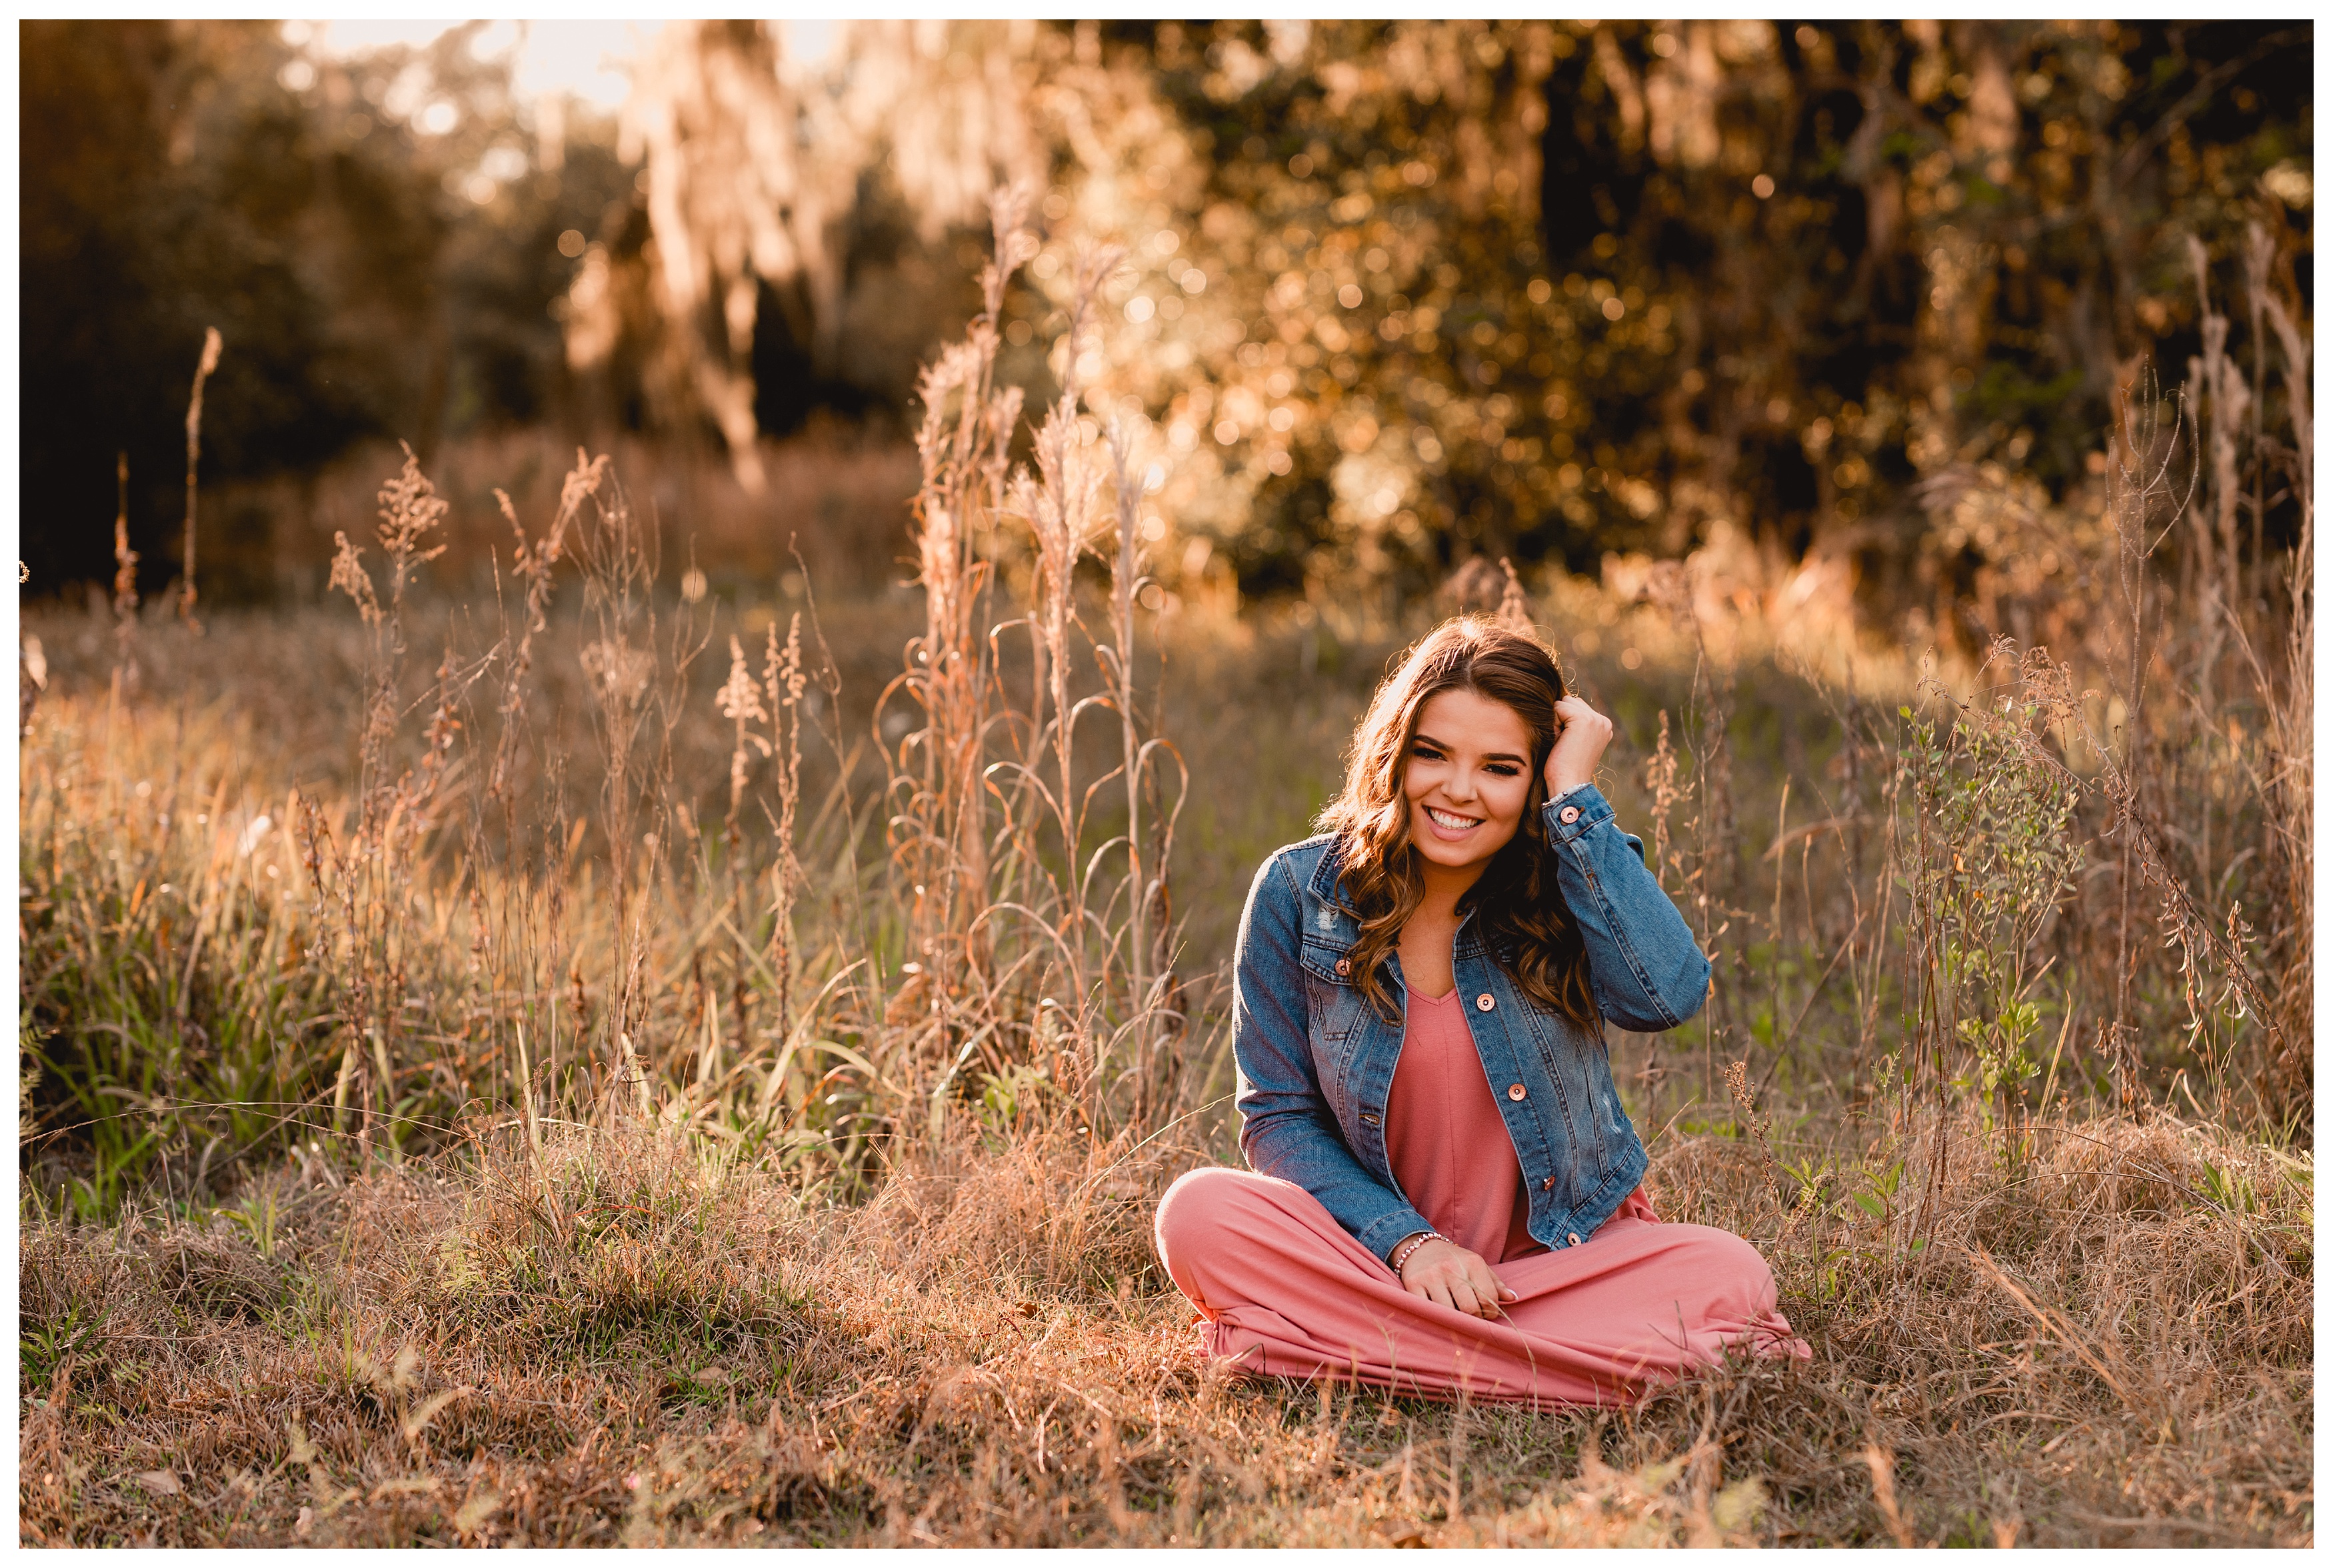 Senior photos full of laughing, candids, and natural movements by professional photographer in Tallahassee, FL. Shelly Williams Photography